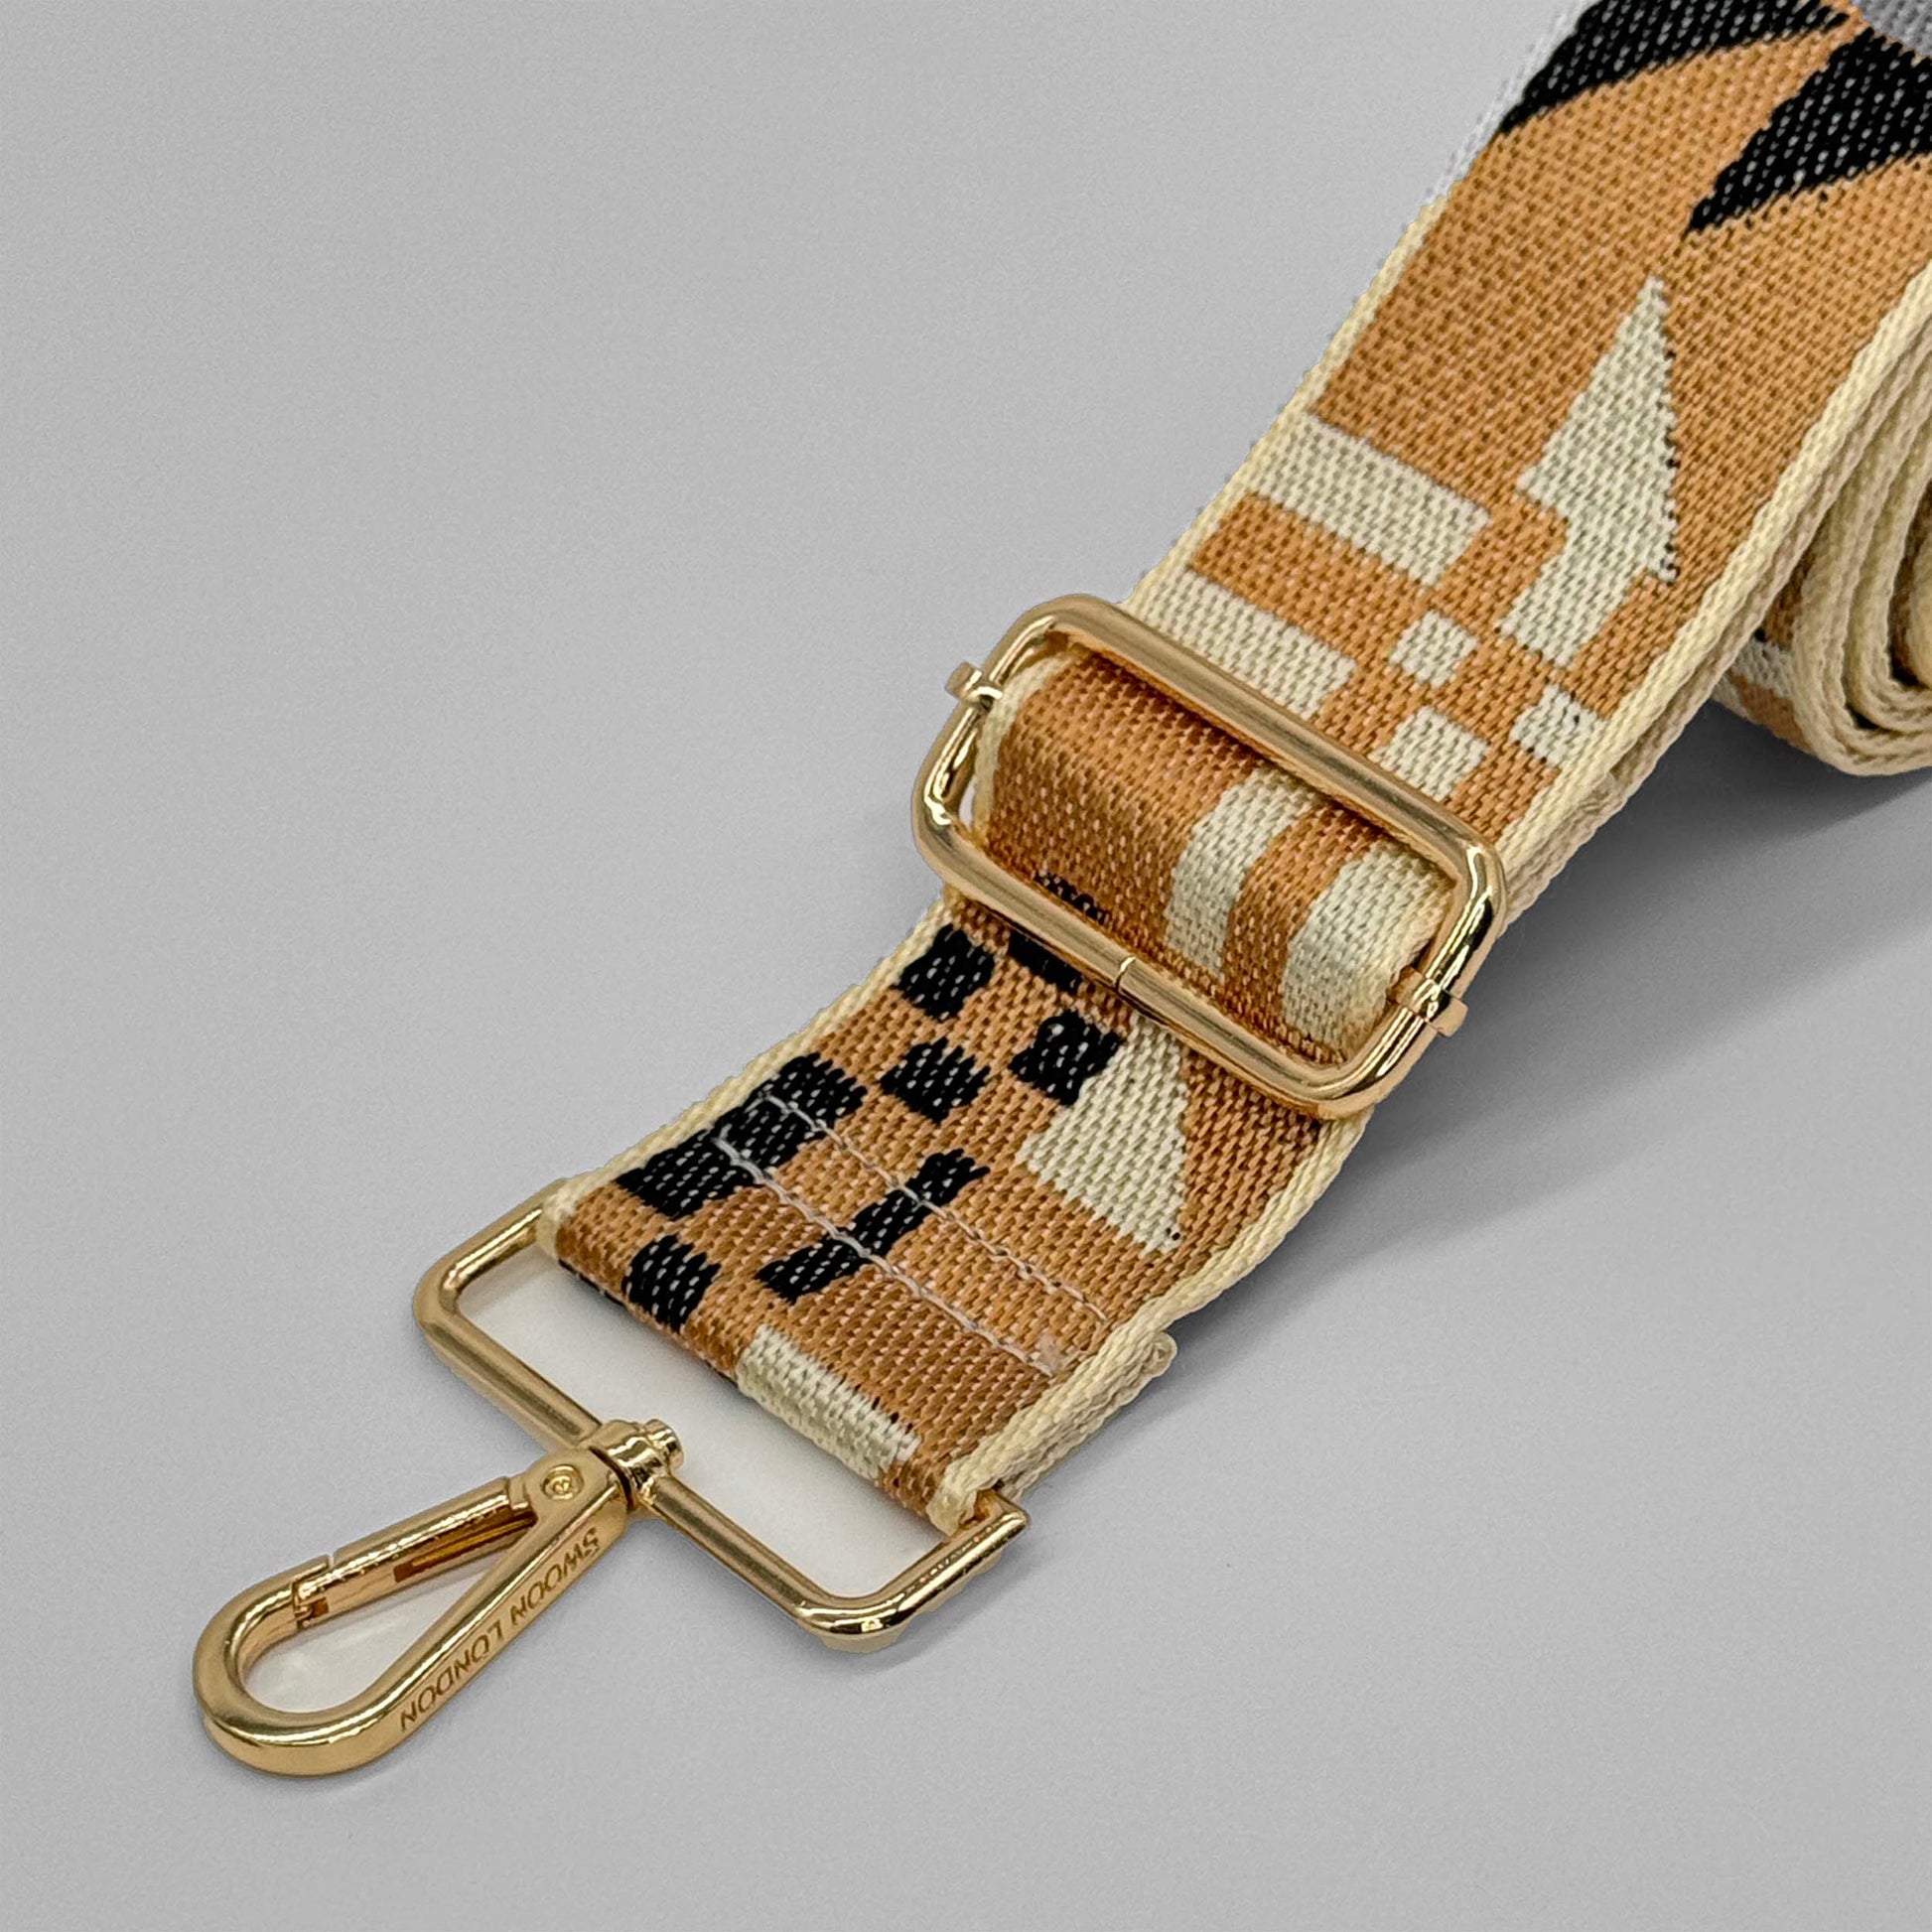 Gold Abstract Bag Strap by Swoon London